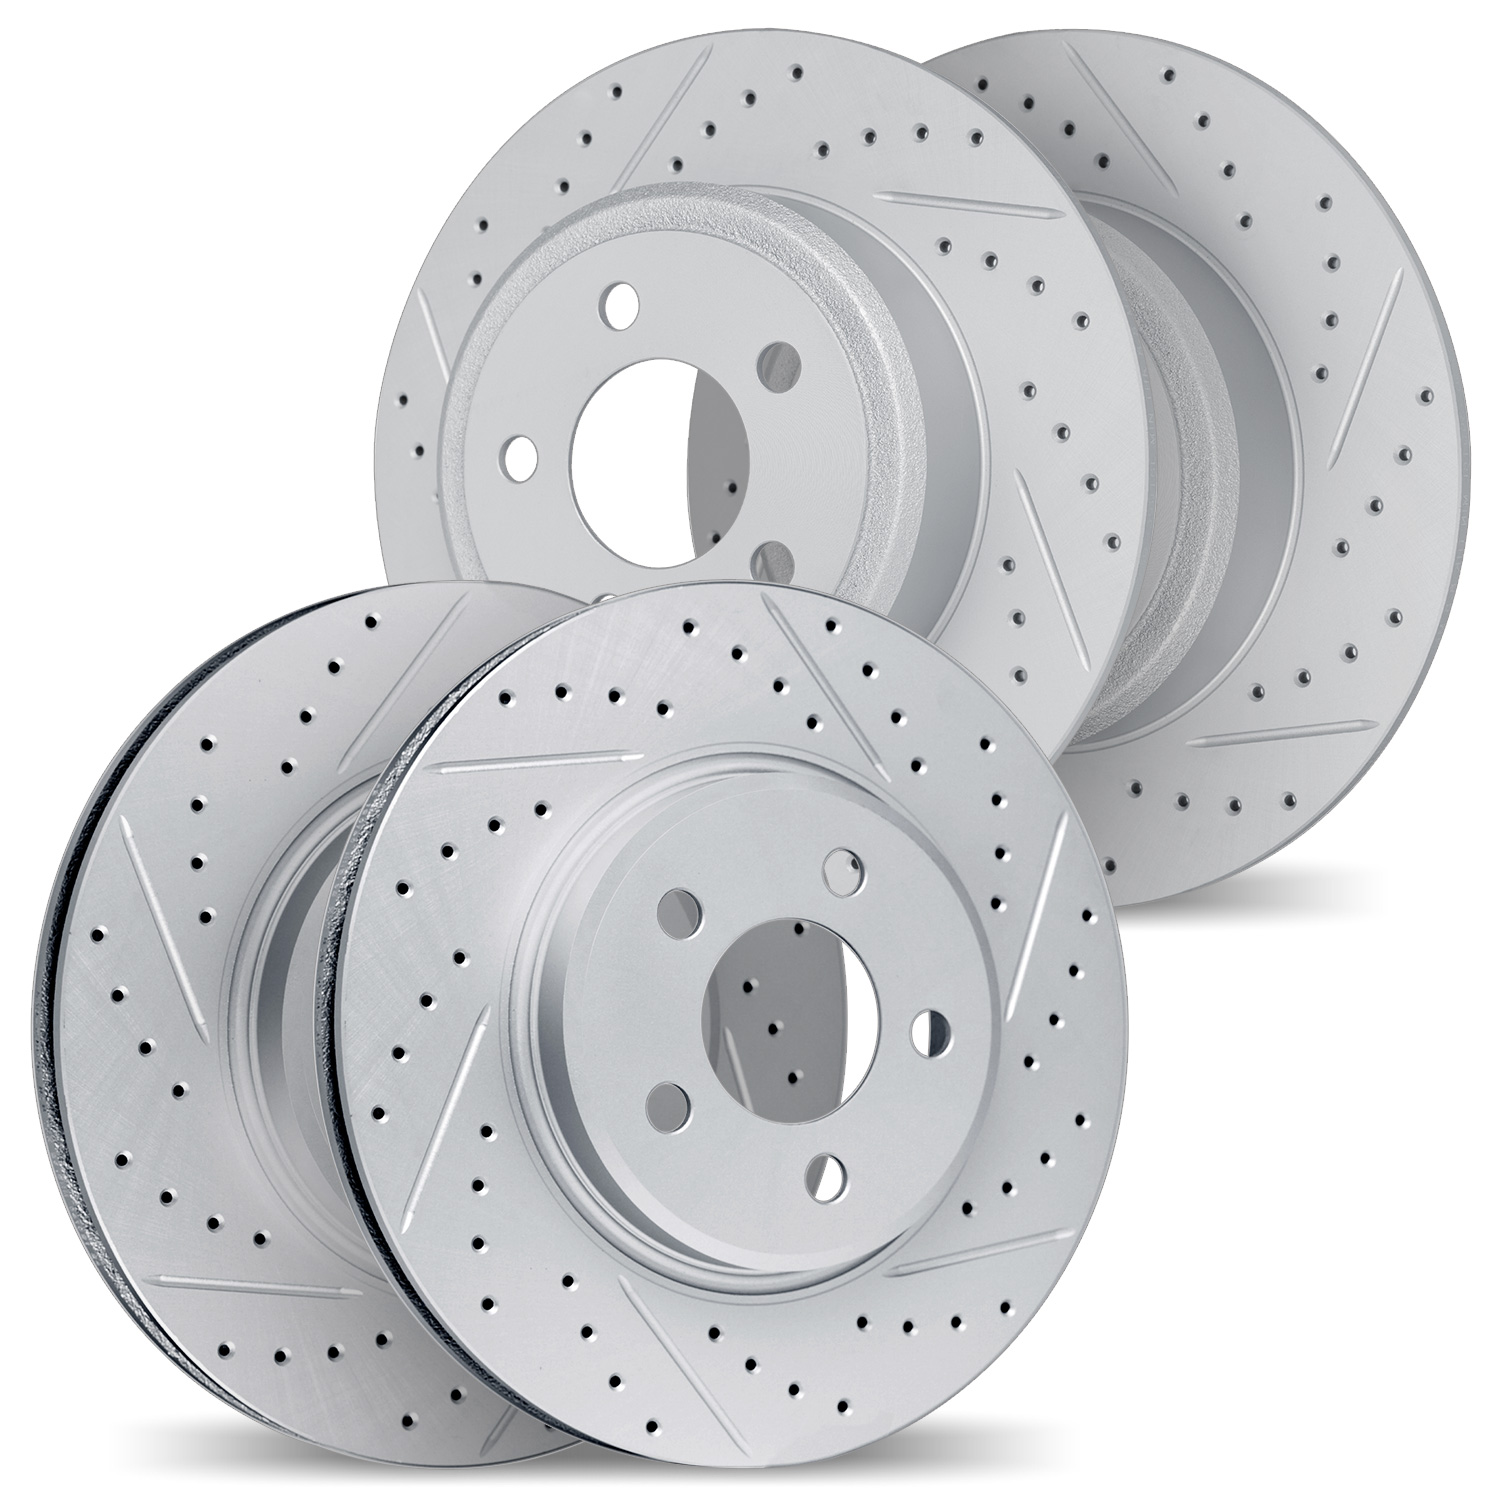 2004-58000 Geoperformance Drilled/Slotted Brake Rotors, 2016-2016 Acura/Honda, Position: Front and Rear